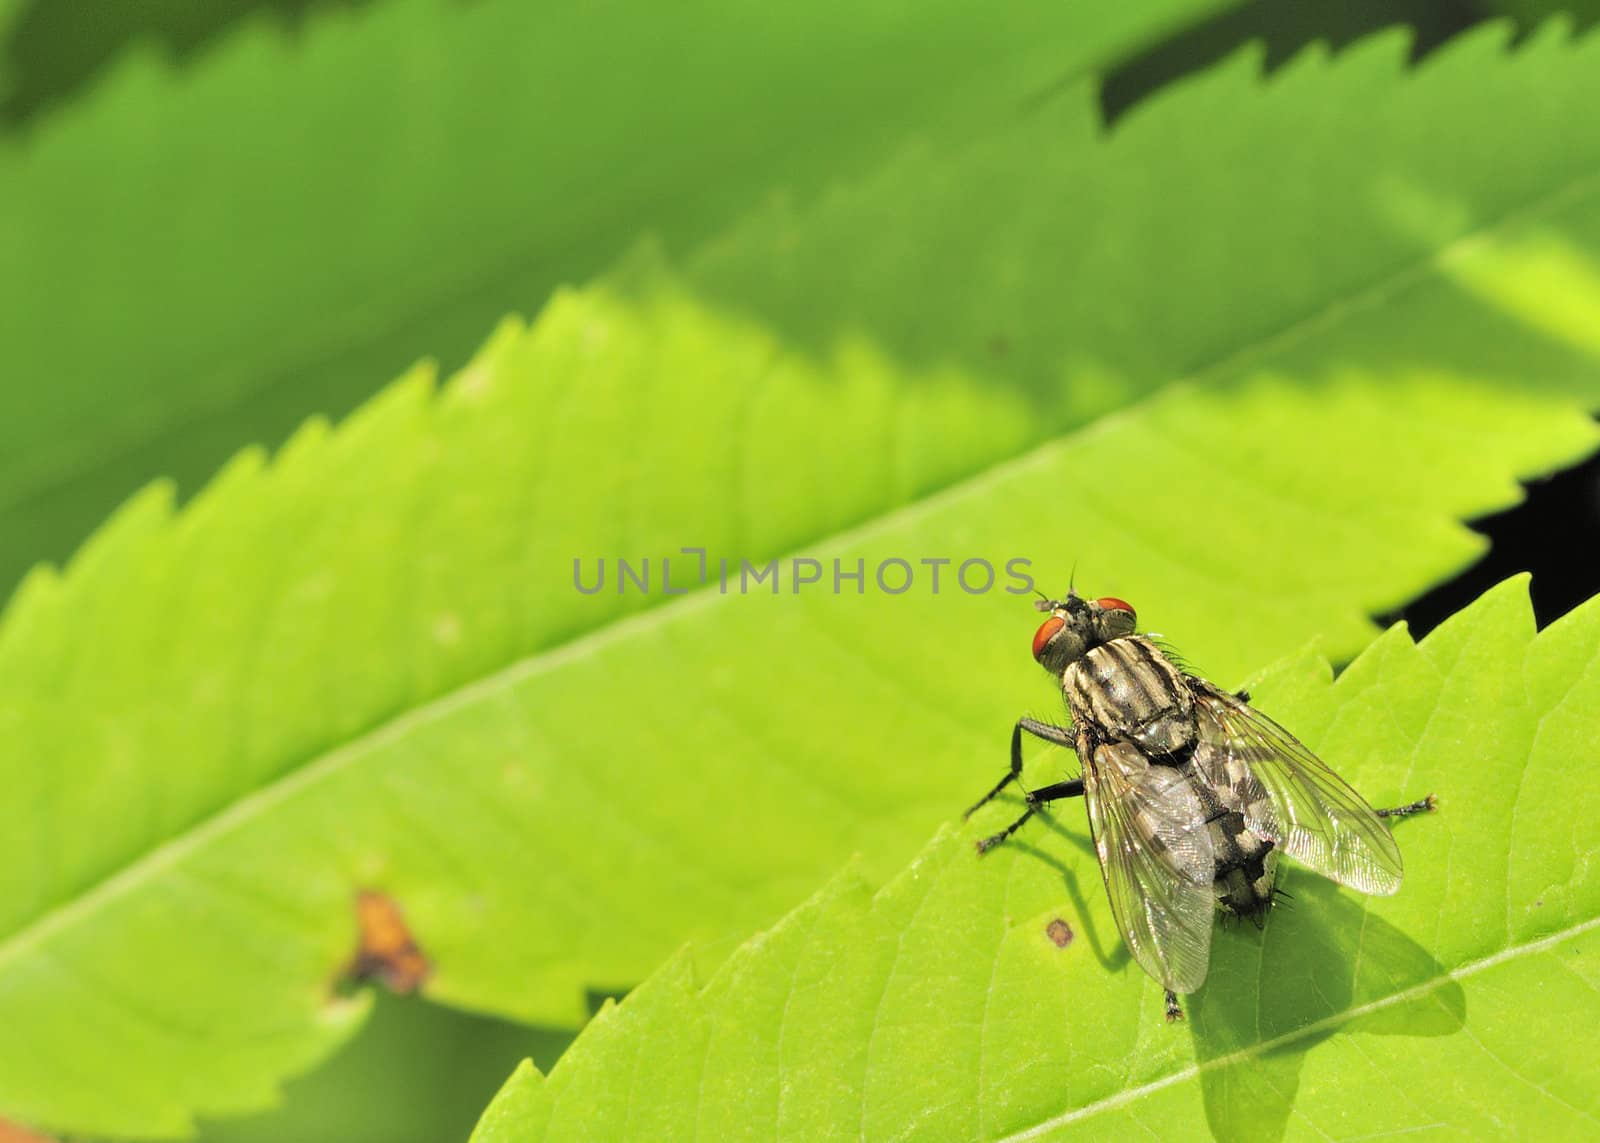 A tachinid fly perched on a green leaf.